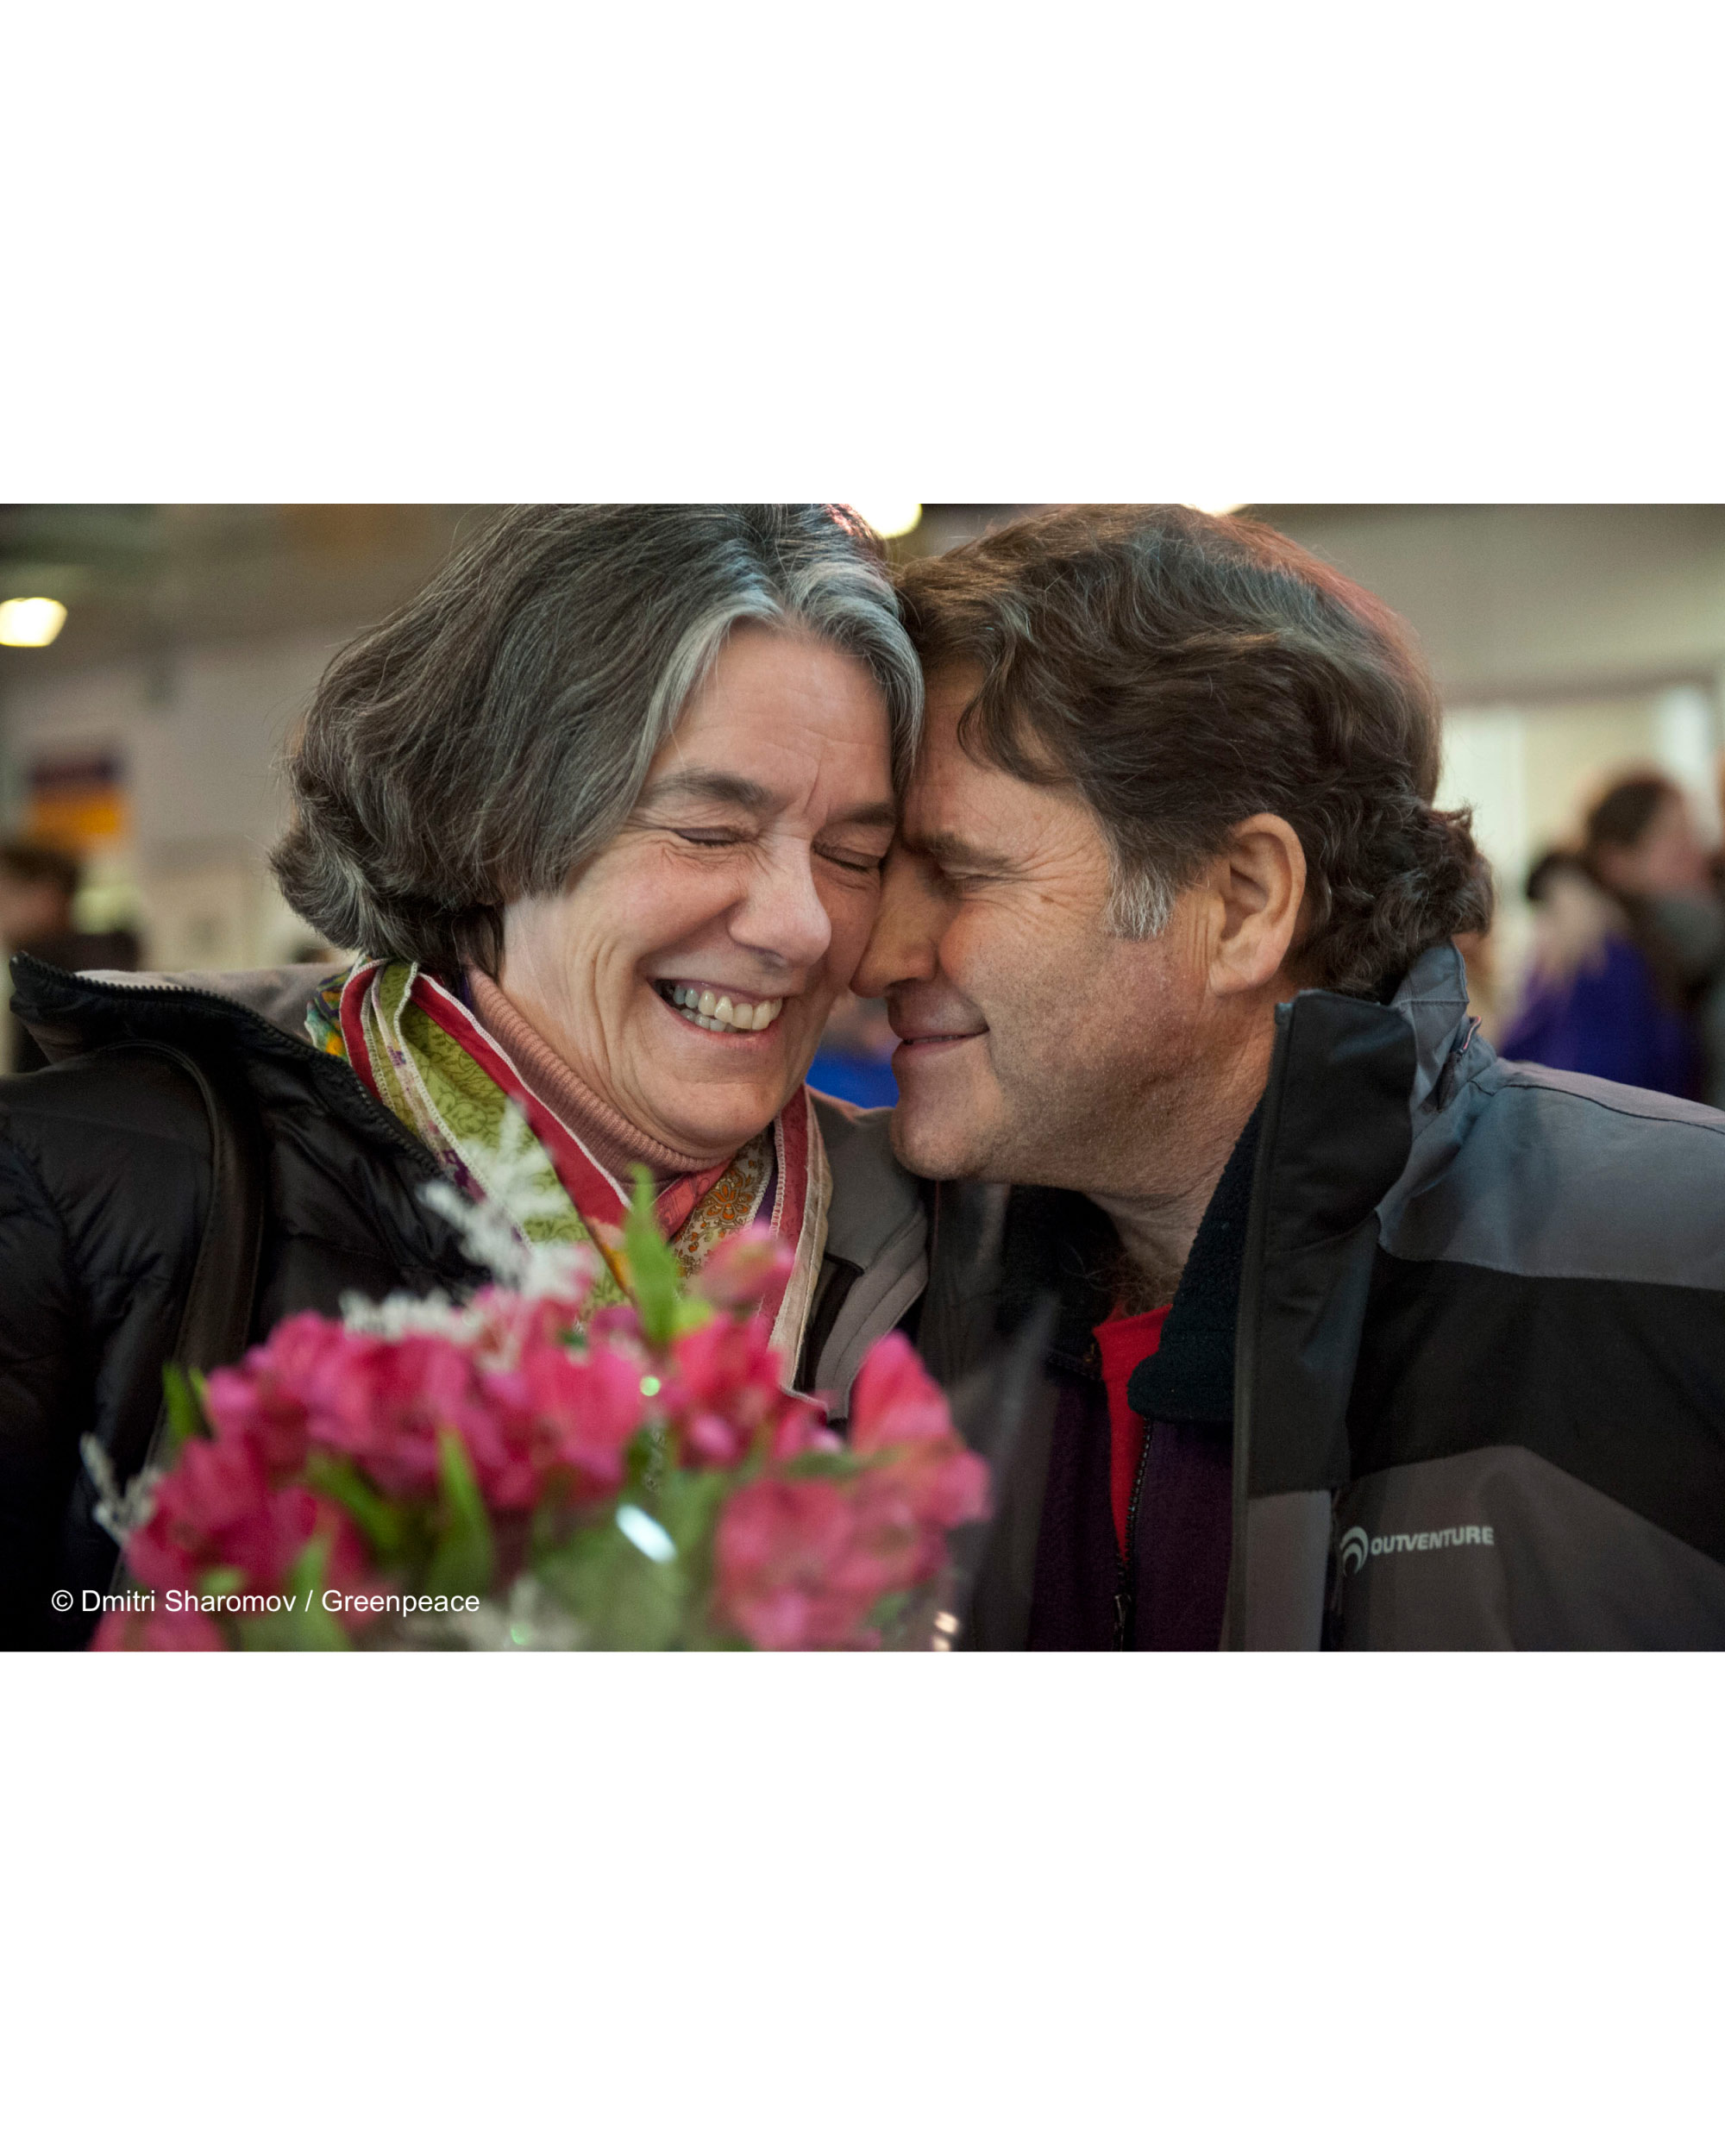 Peter and his wife reunited in St. Petersburg after his release. Image courtesy of Greenpeace.